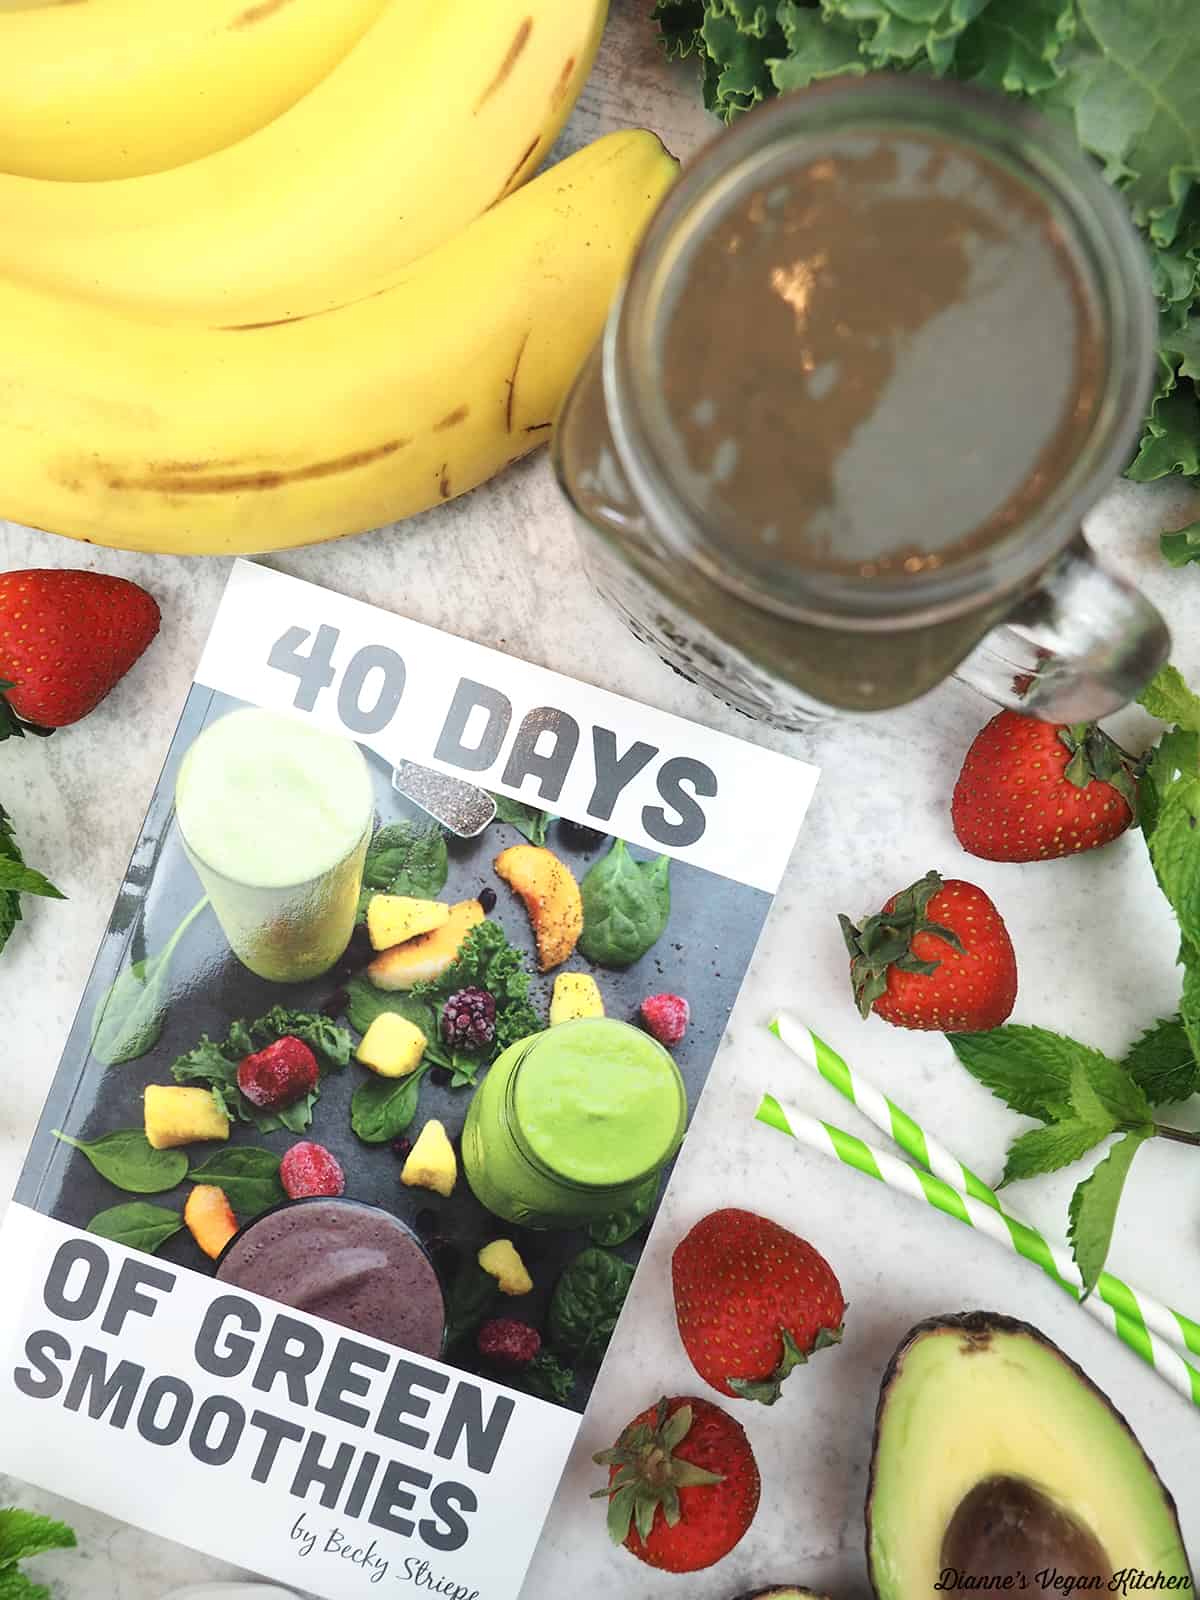 40 Days of Green Smoothies book with a chocolate shake, bananas, strawberries, and an avocado